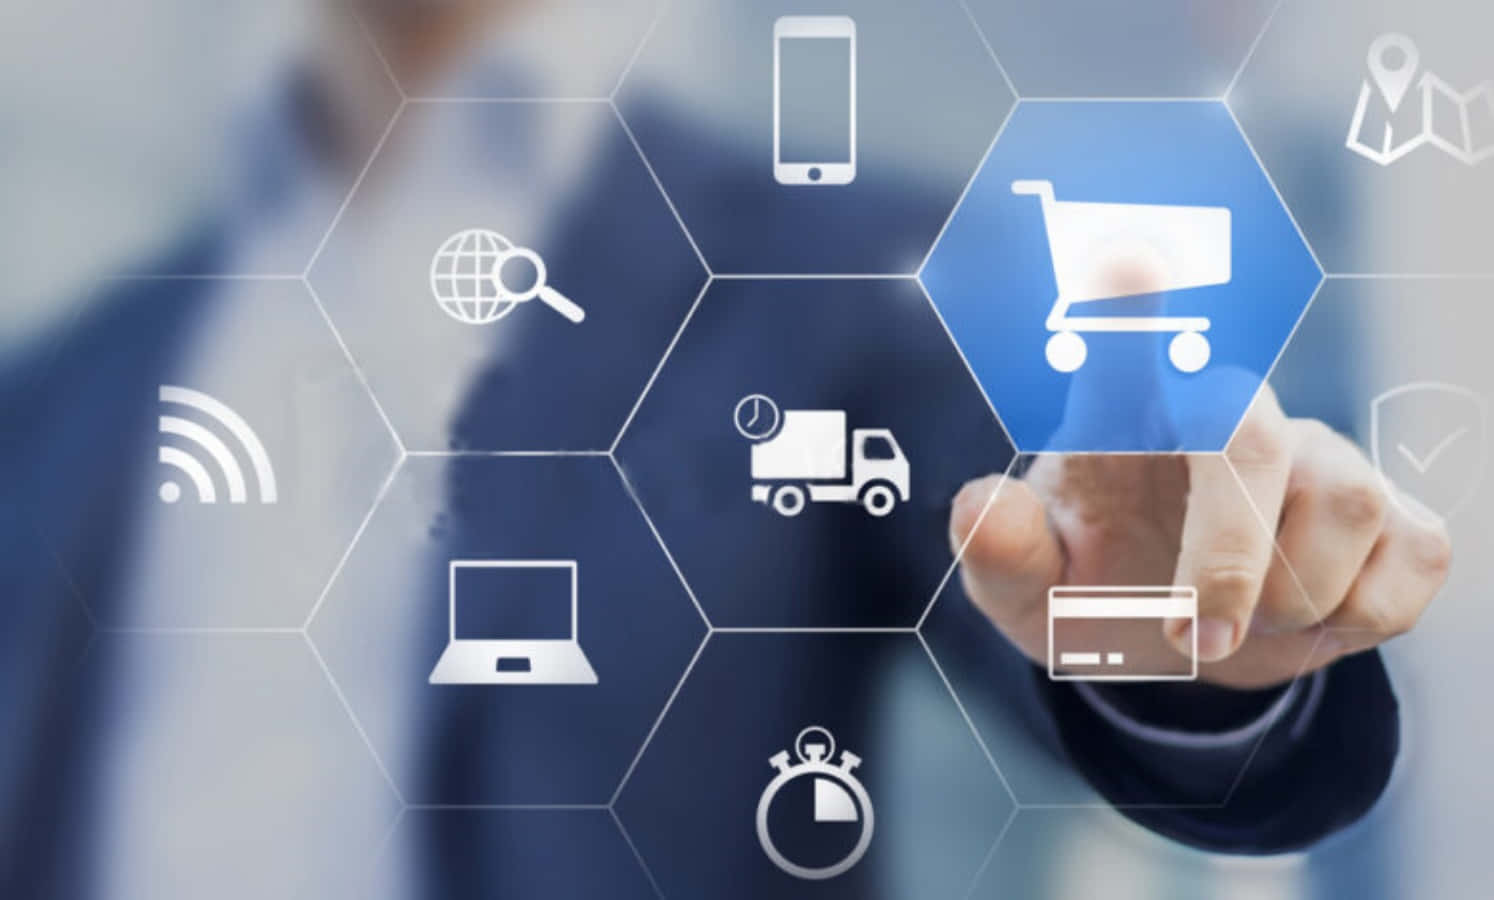 Accelerate your business growth with e-commerce